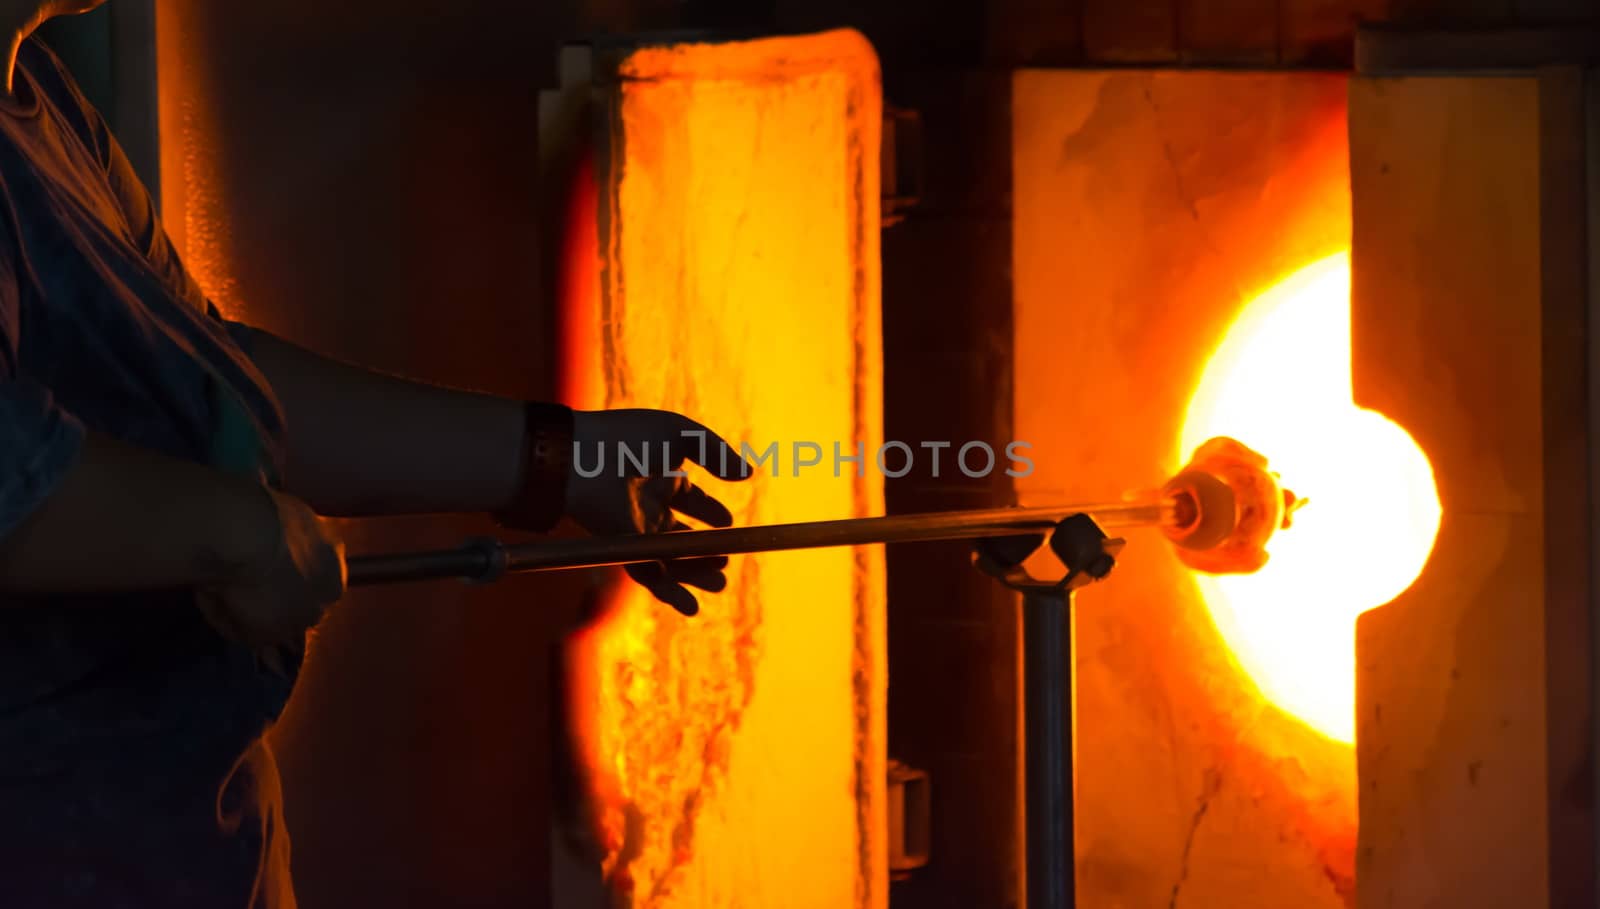 shaping in glass oven. very hot, glass melting